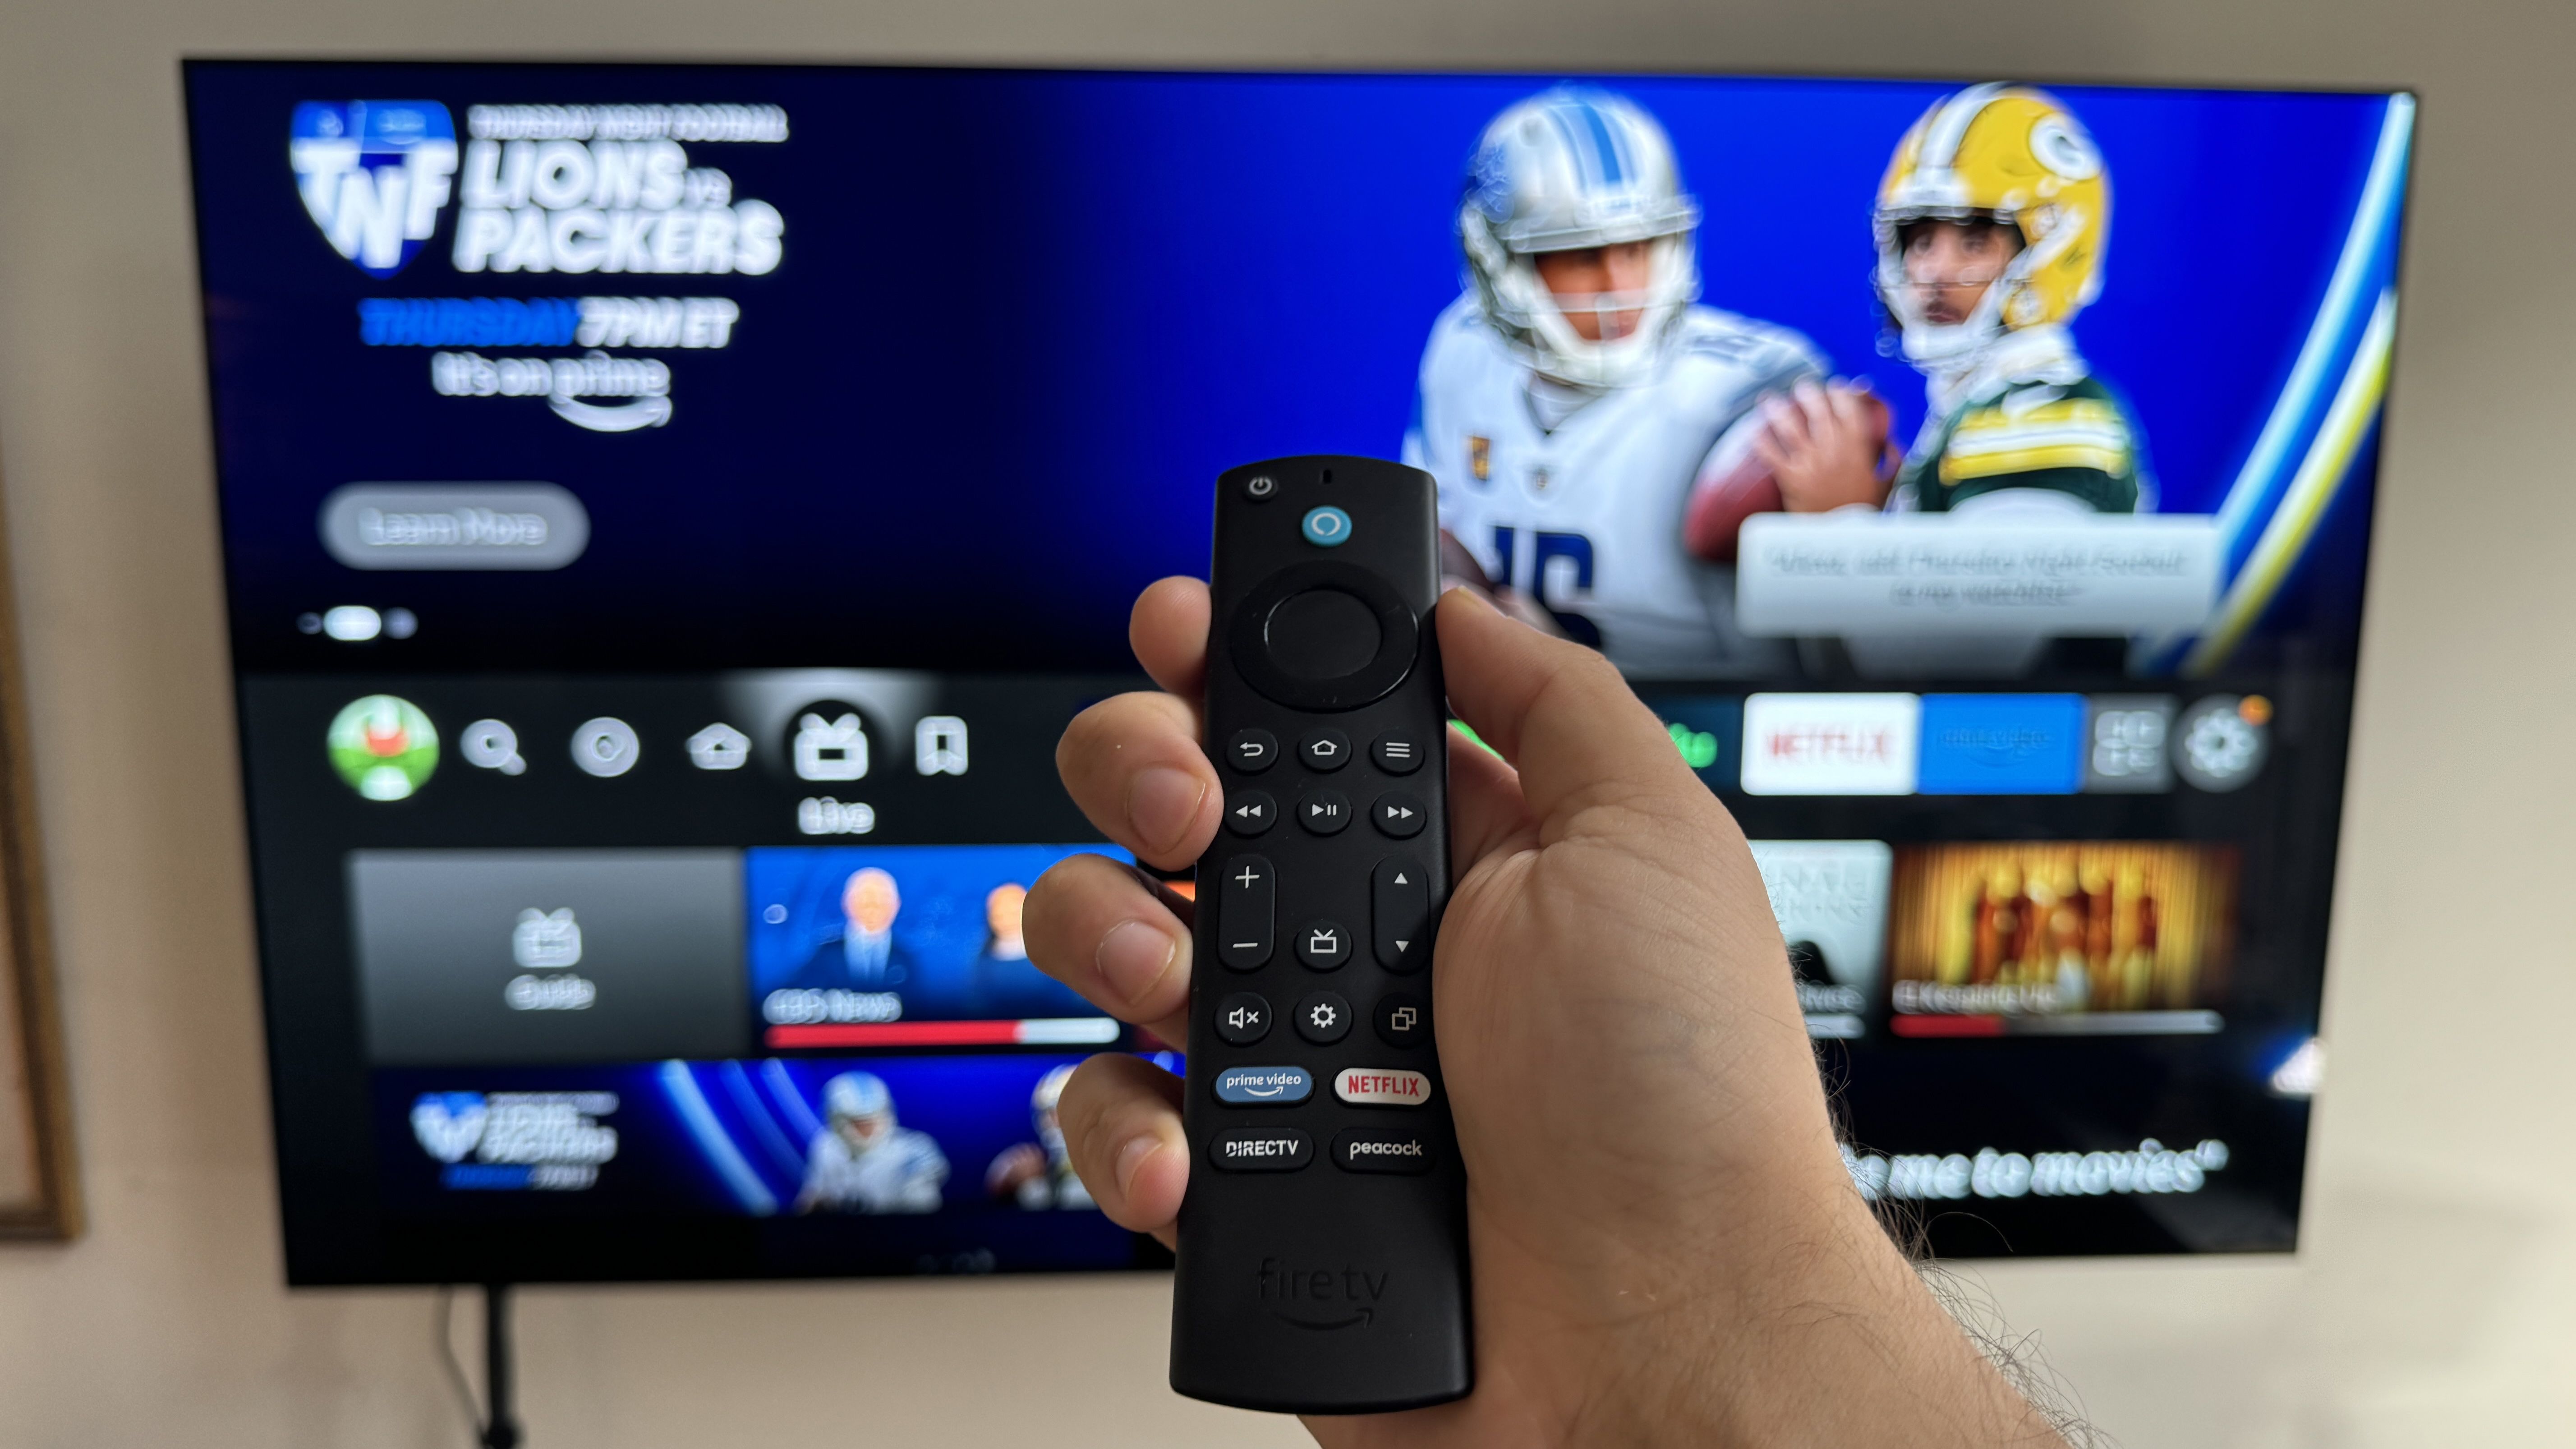 Fire TVs now support Prime Video watch parties